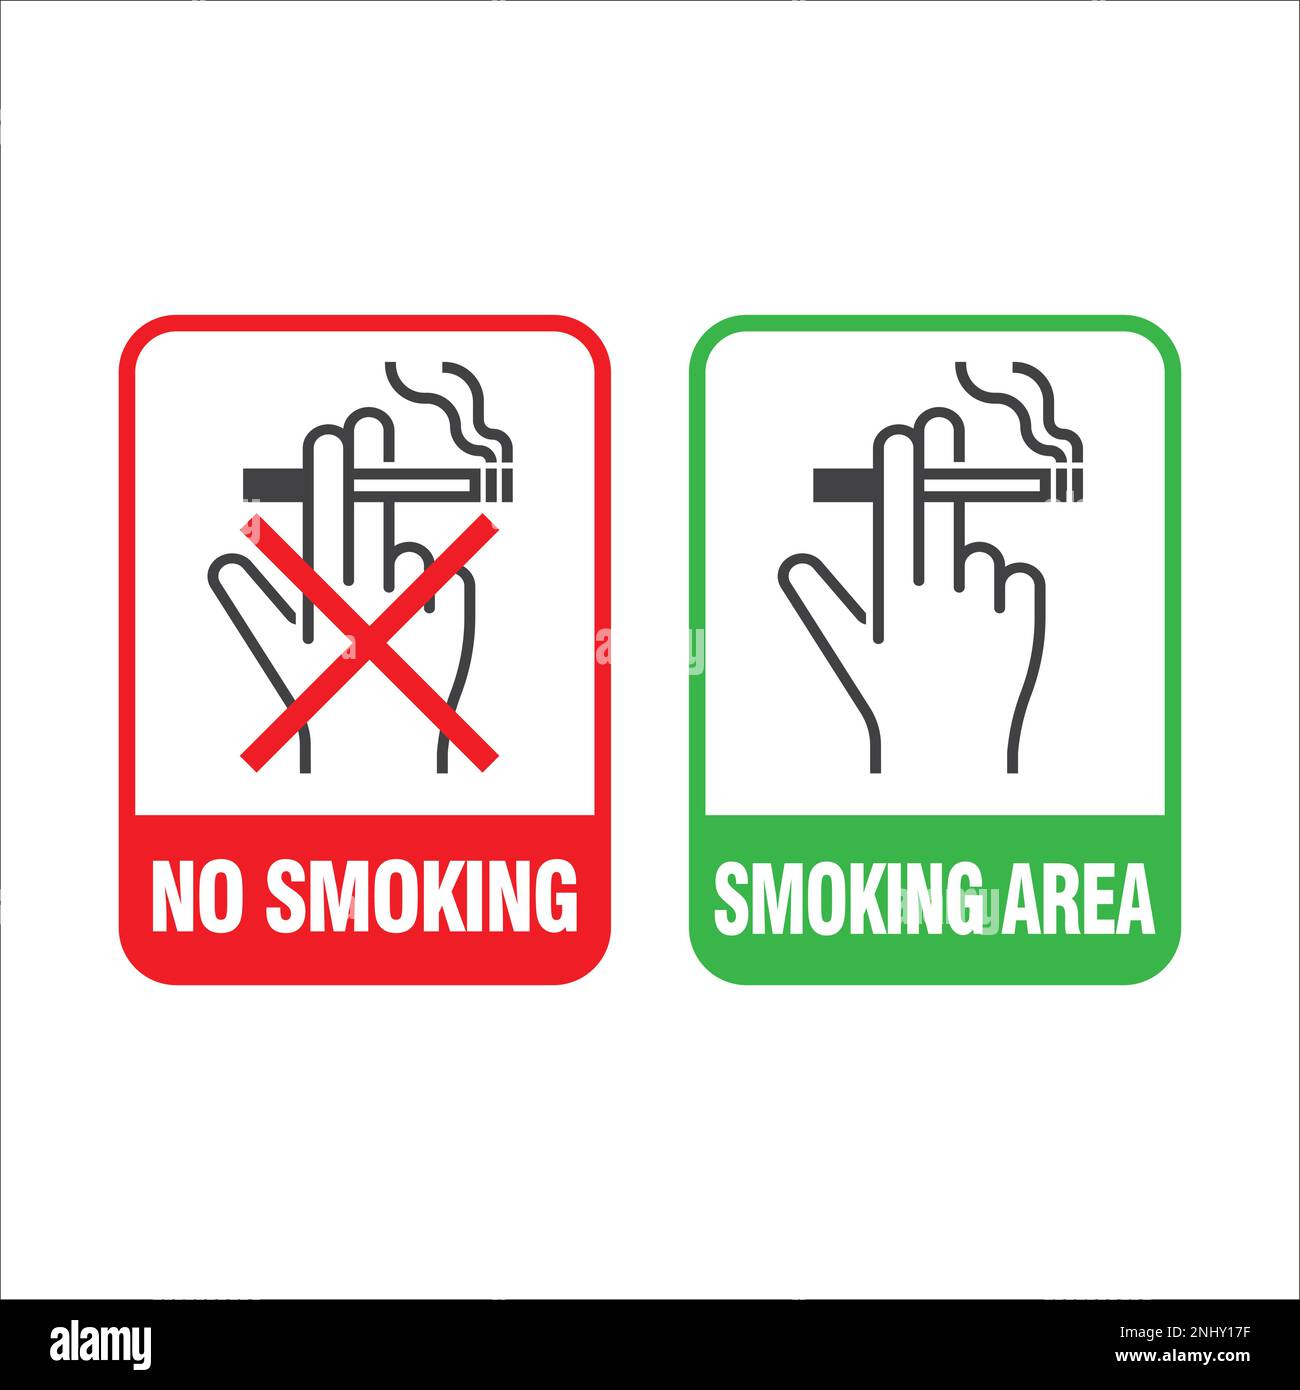 No smoking and Smoking area labels. Smoking design sign element. Vector illustration Stock Vector